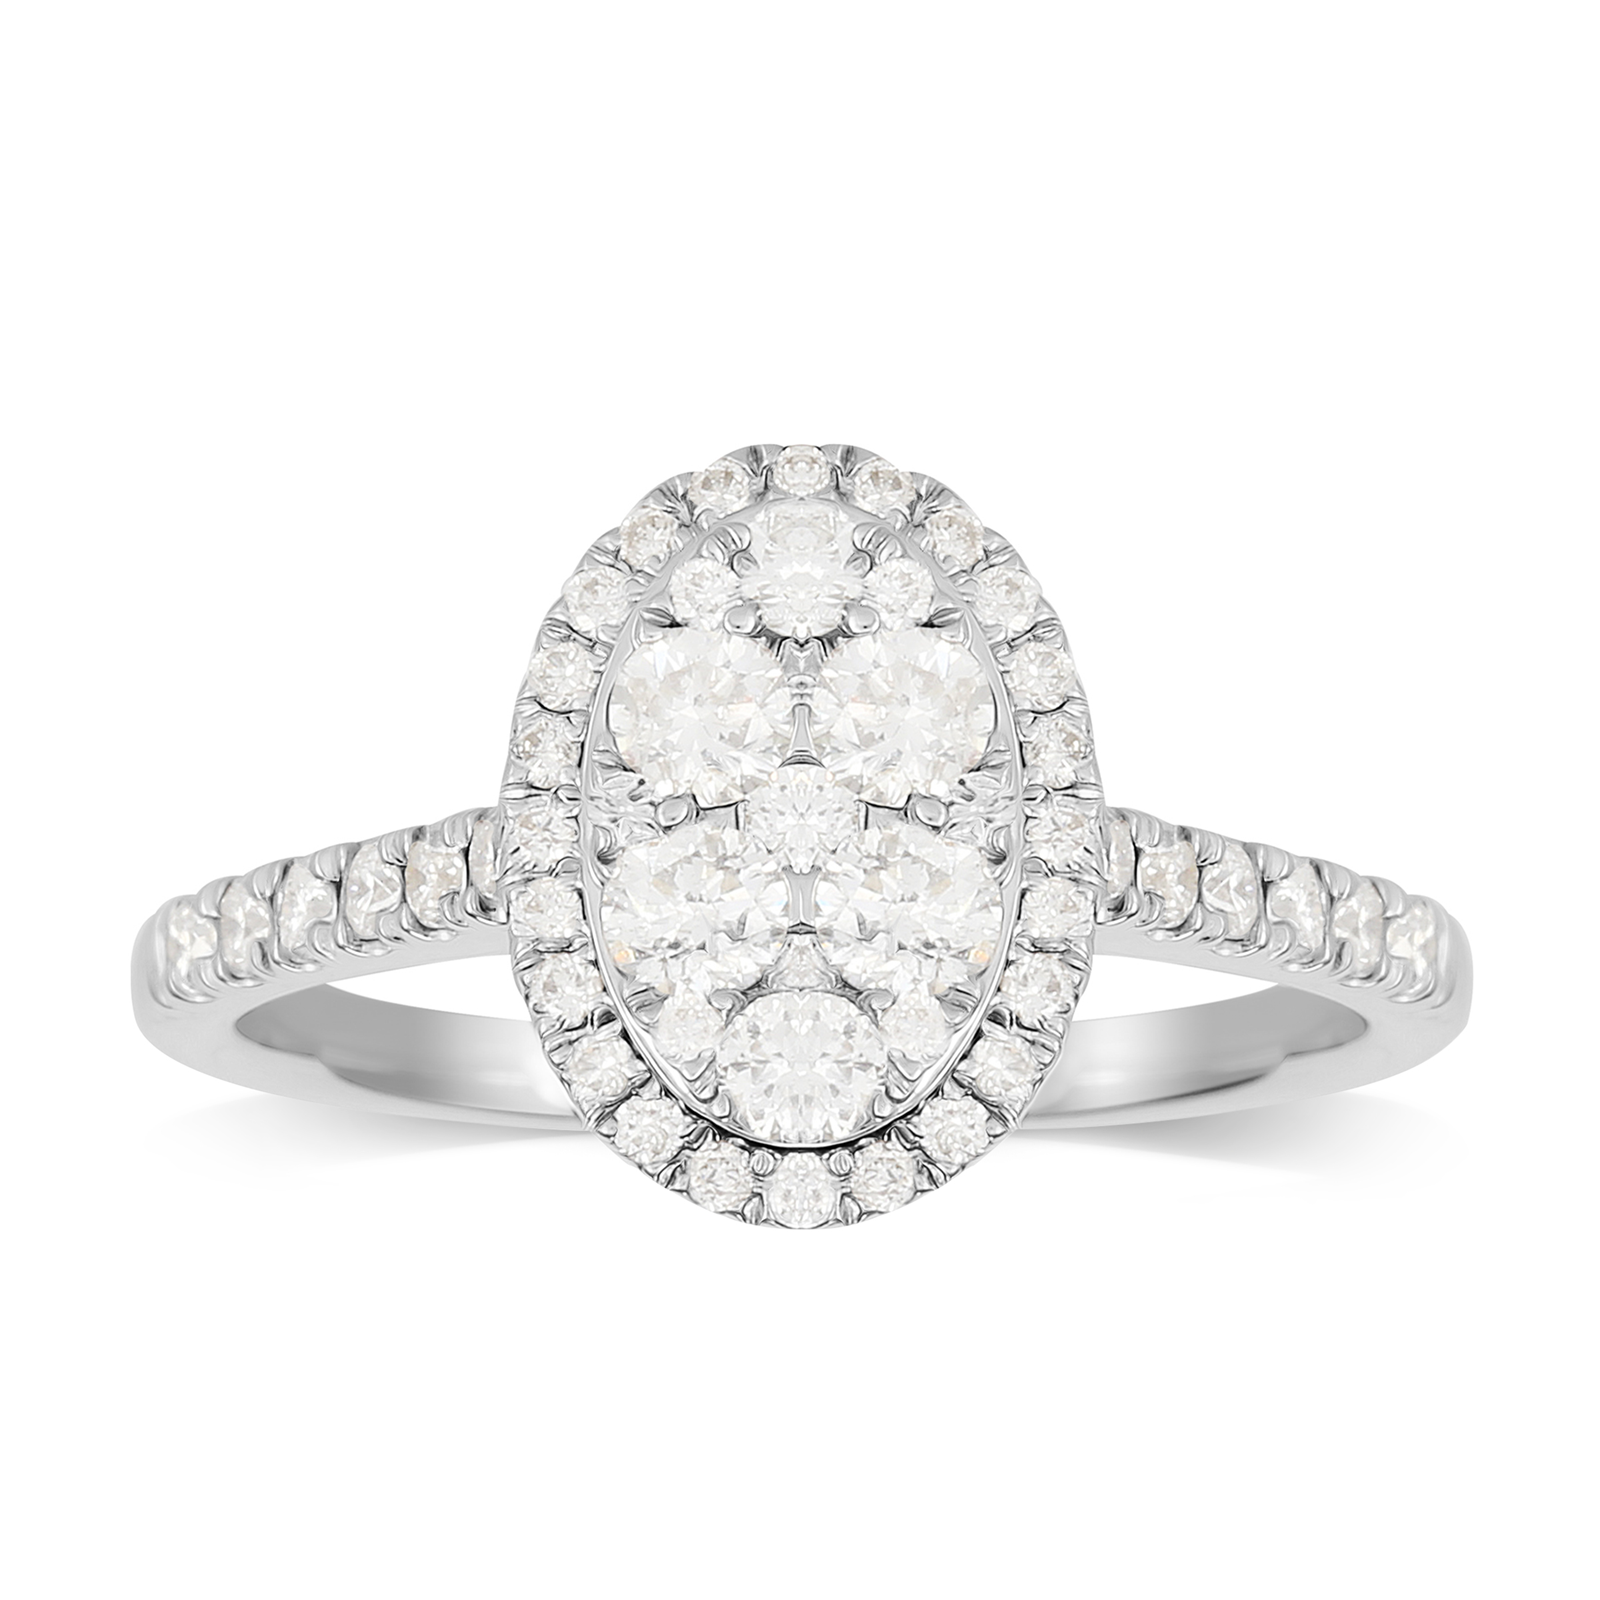 18ct White Gold 0.75ct Diamond Oval Cluster Engagement Ring | Rings ...